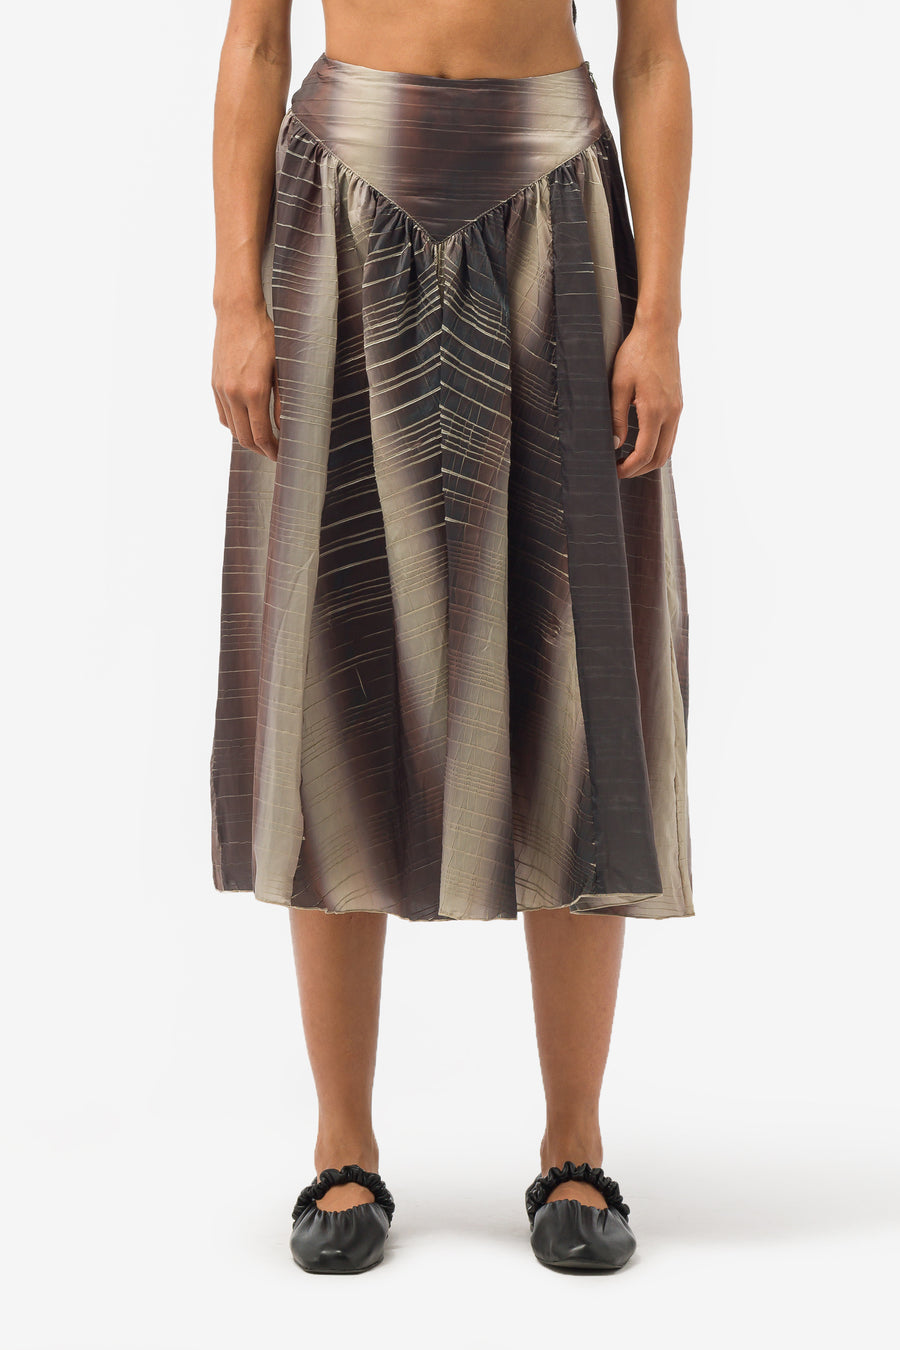 Anne Isabella - Women's Pleated Gather Skirt in Fade Print